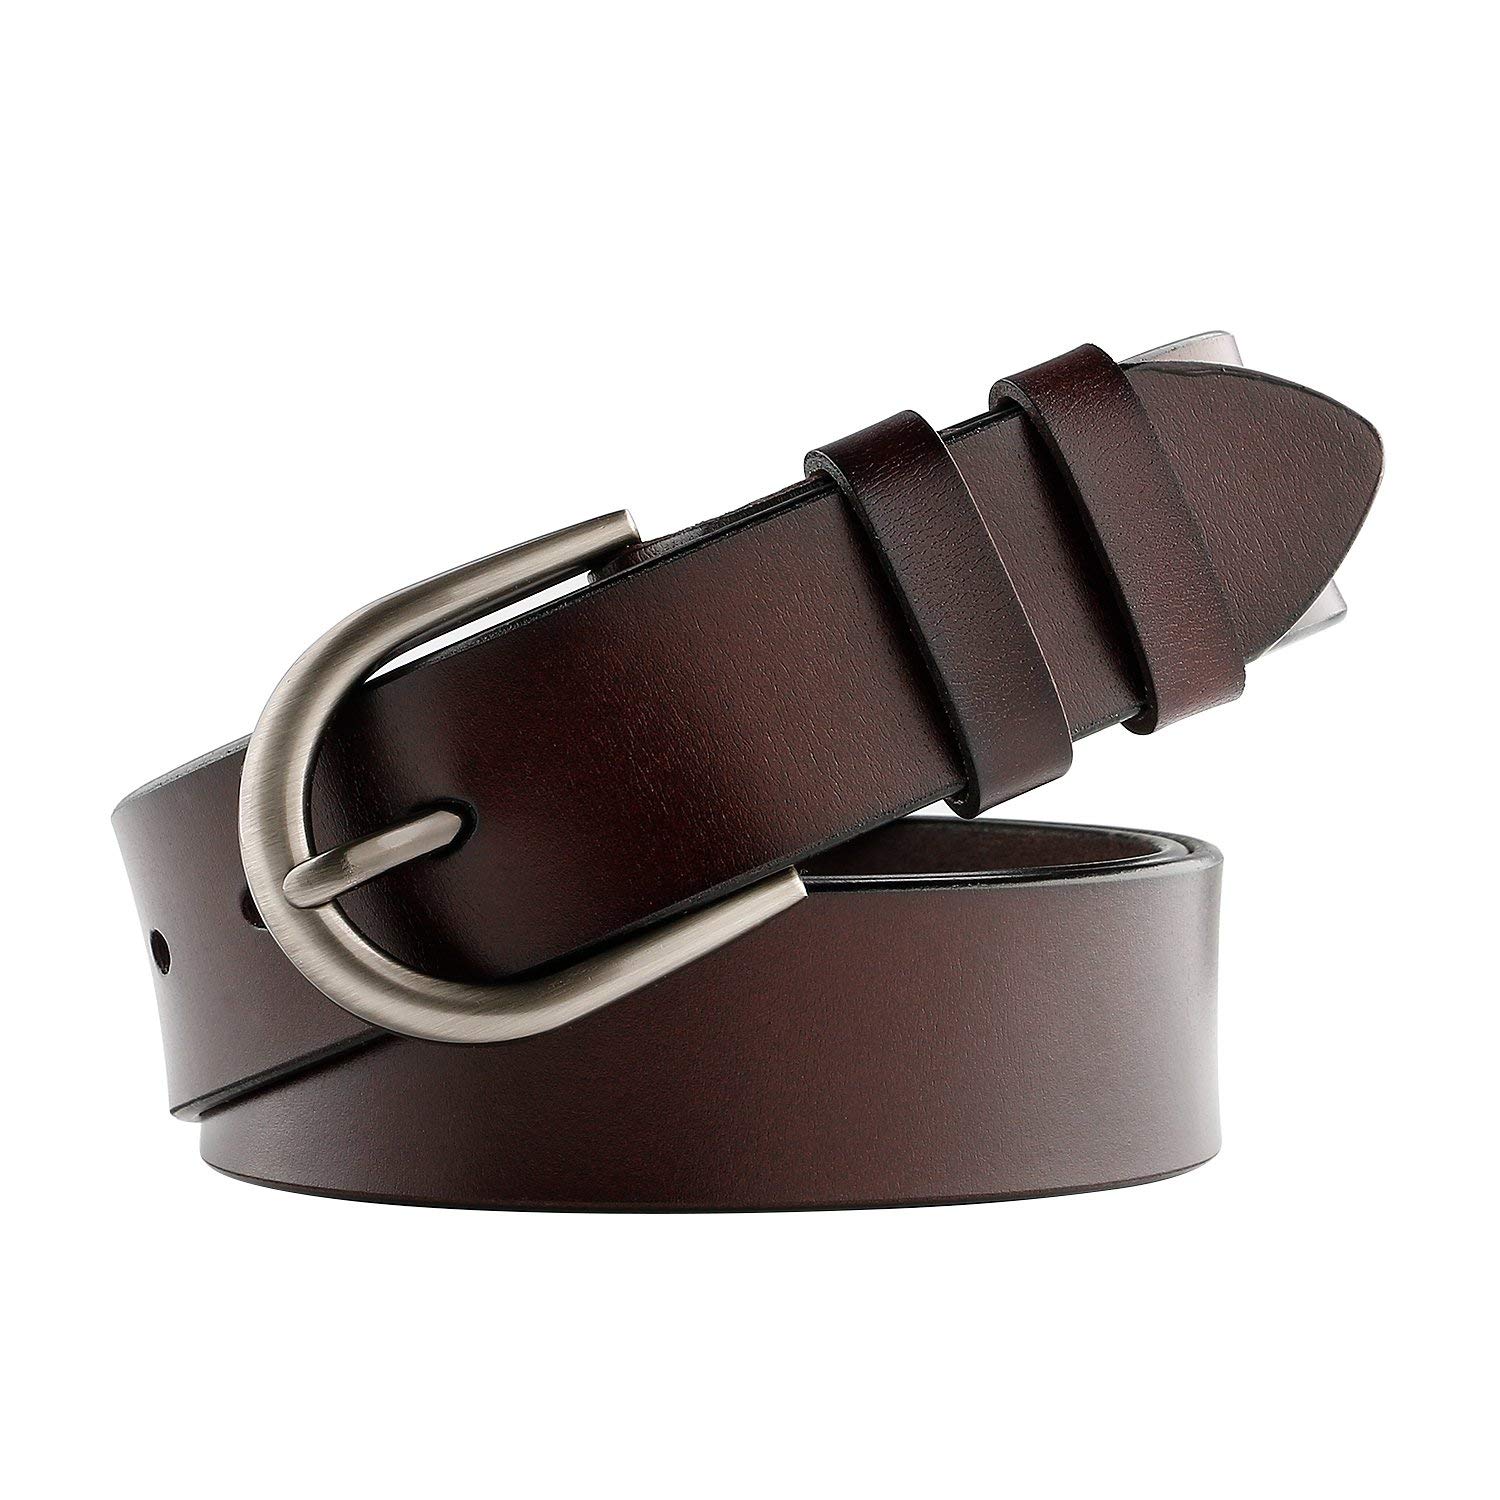 JASGOOD Women Leather Belts for Jeans Pants Fashion Dress Brown Belt for  Ladies